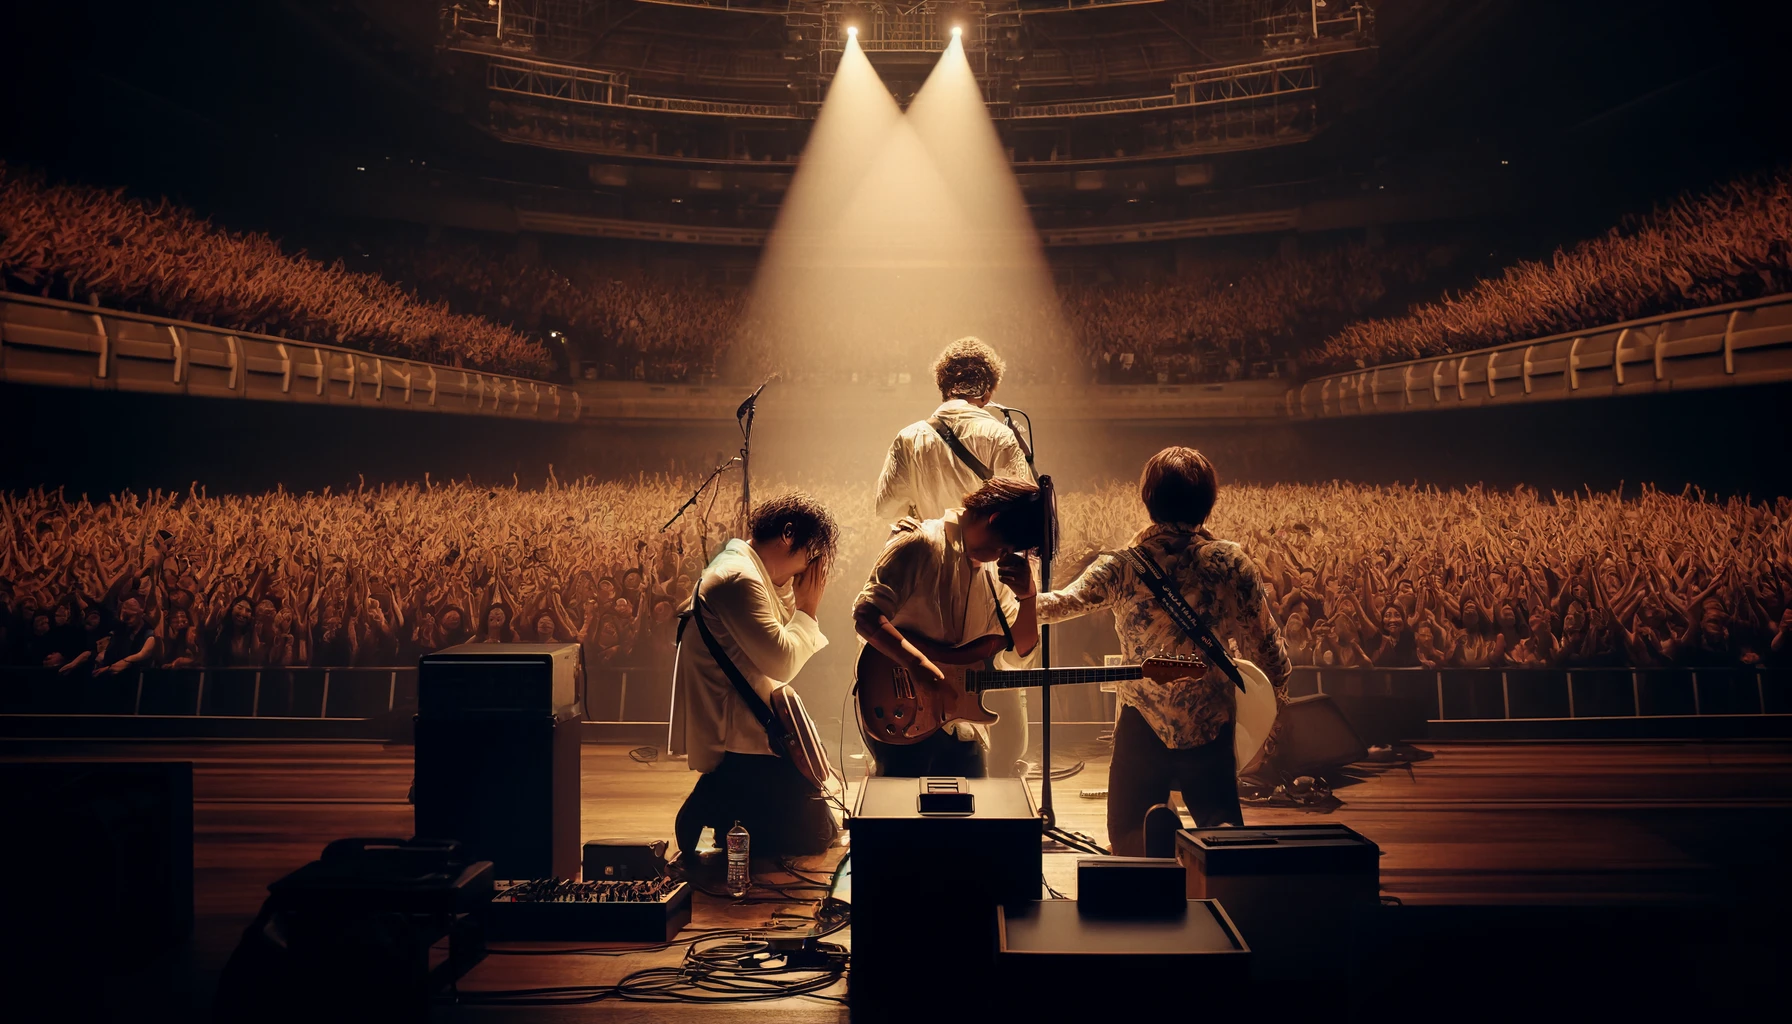 An emotional moment at a live concert in the Budokan arena in Tokyo, Japan, capturing the feeling of a long-awaited dream realized. The image shows the band members on stage, overwhelmed with emotion, as one of them wipes tears from their eyes while the others embrace or raise their hands in triumph. The crowd is visibly moved, some fans are also crying, while others cheer passionately. The stage is bathed in warm, ambient lighting that highlights the poignant atmosphere. The setting reflects a significant milestone for the performers, depicted in a wide 16:9 format.